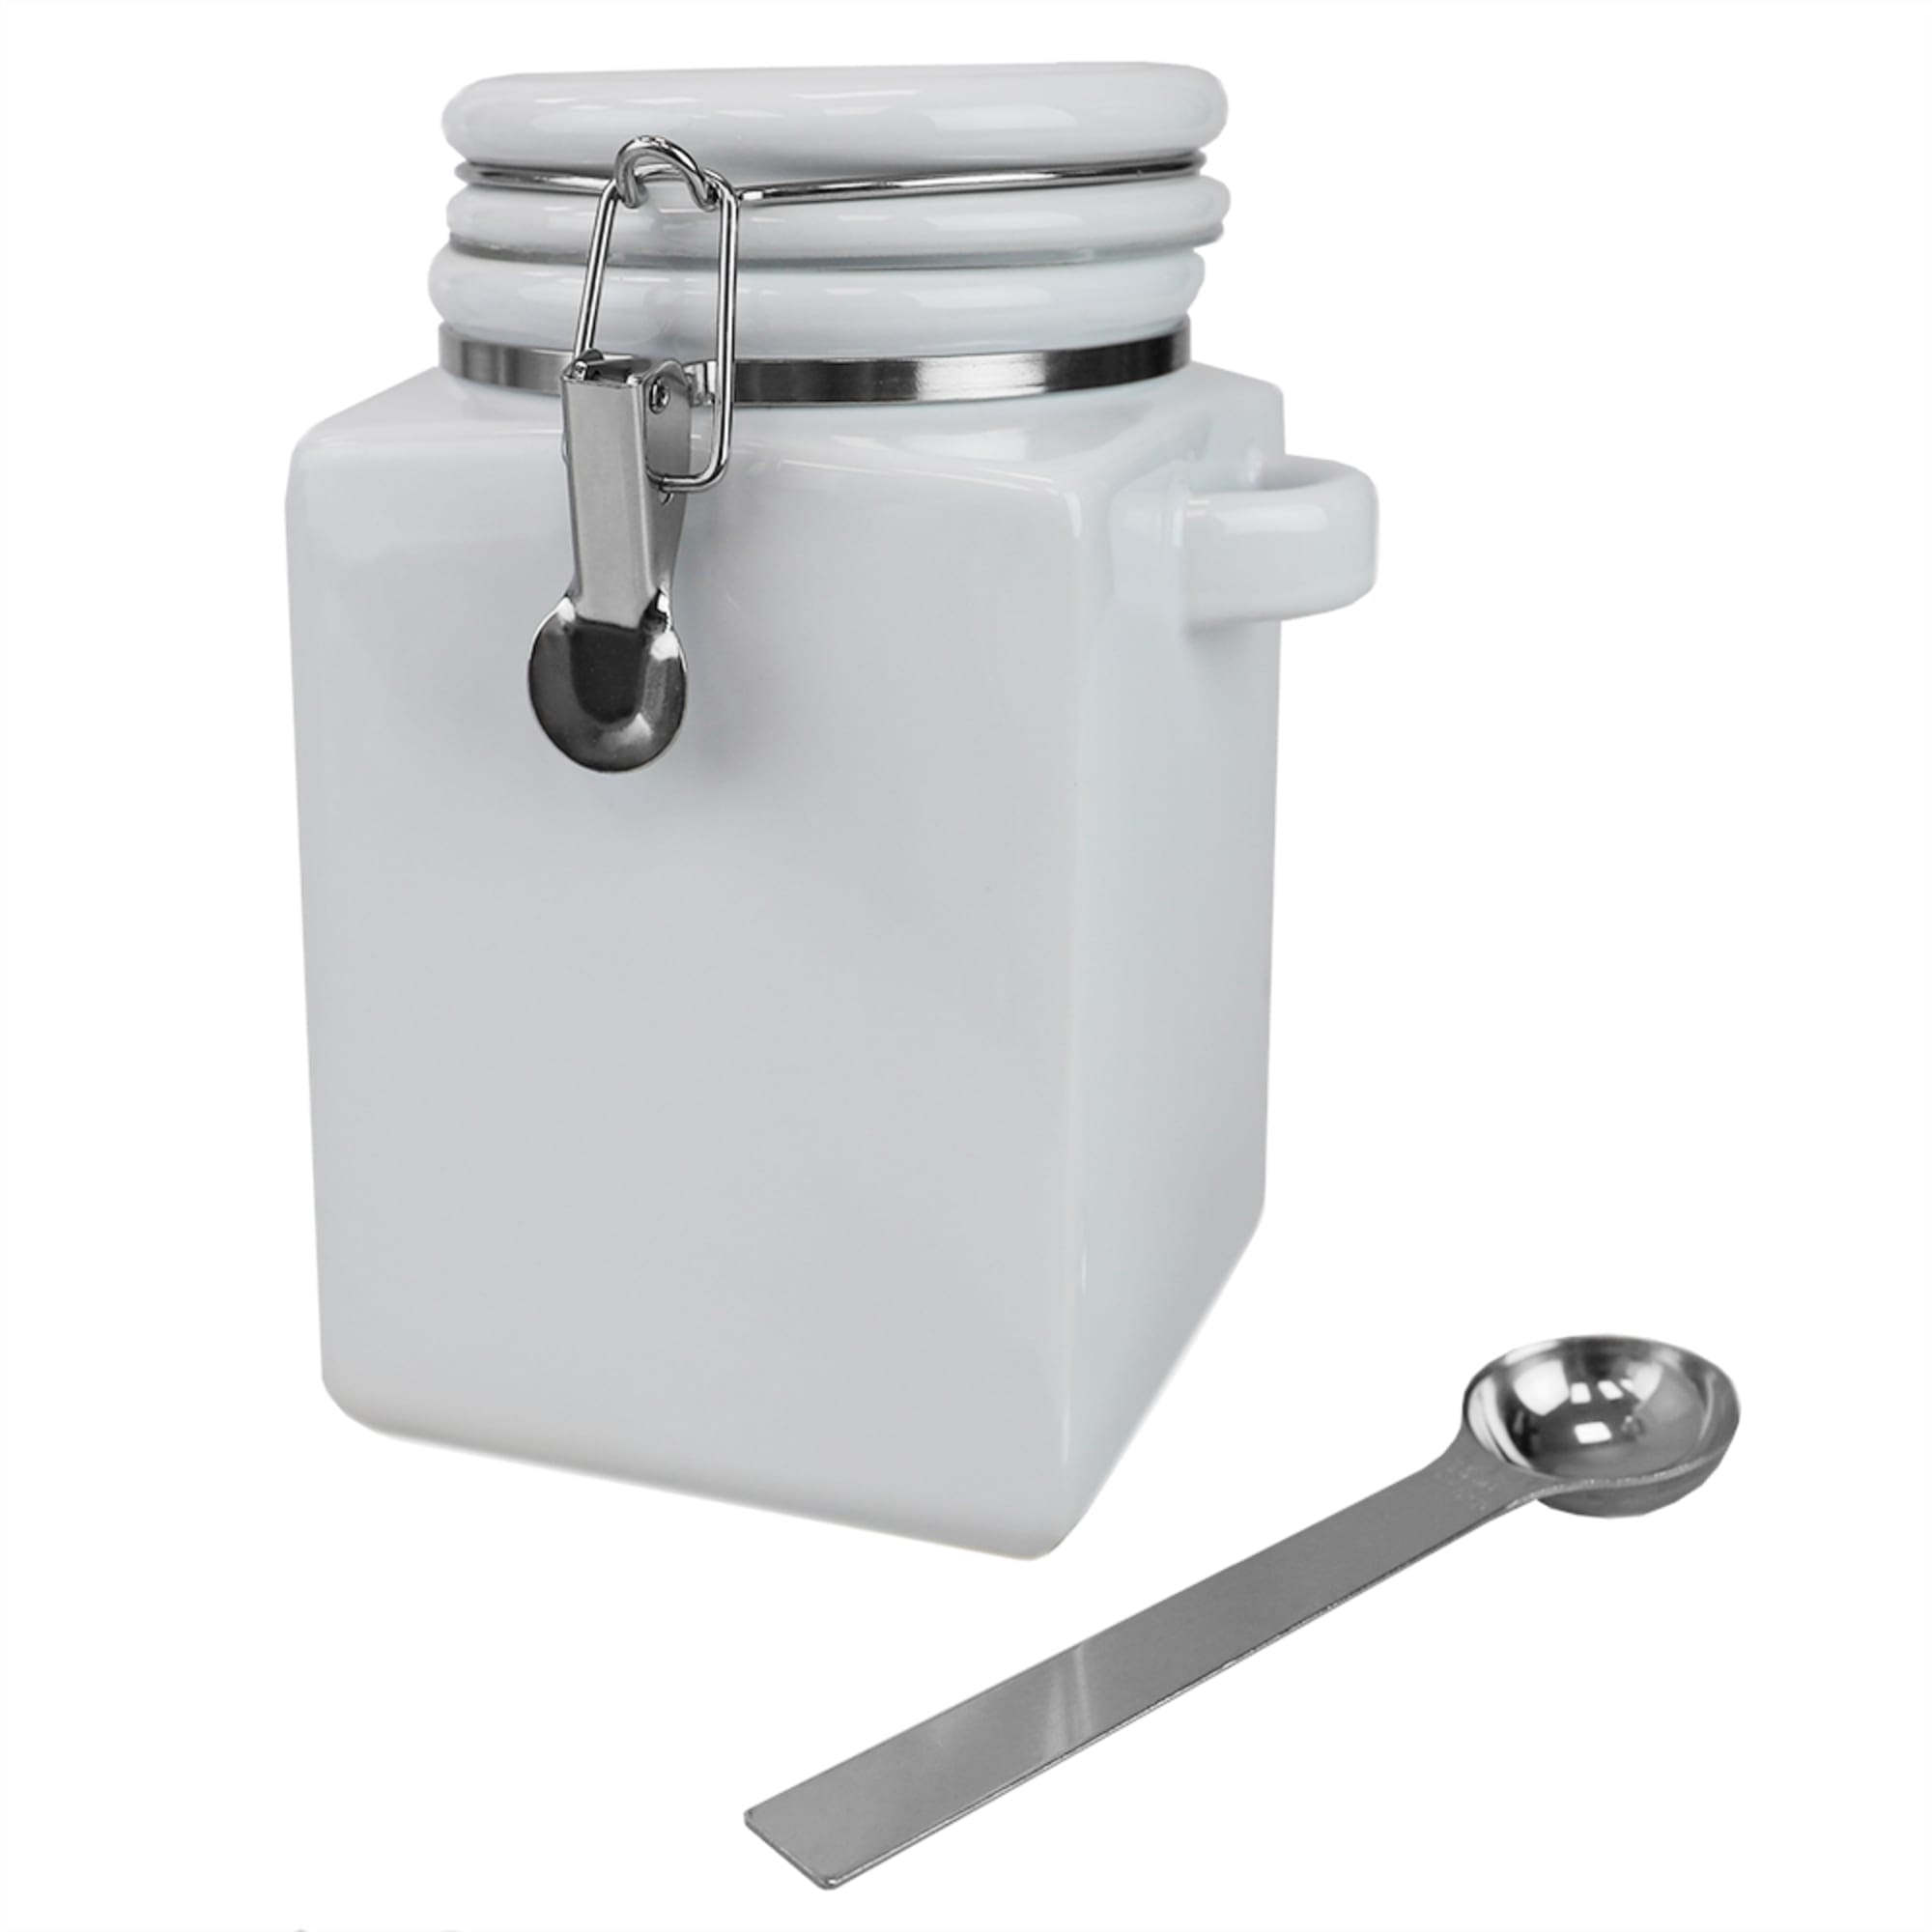 Home Basics Easy Grip 4 Piece Ceramic Canisters with Spoons, White $30.00 EACH, CASE PACK OF 2